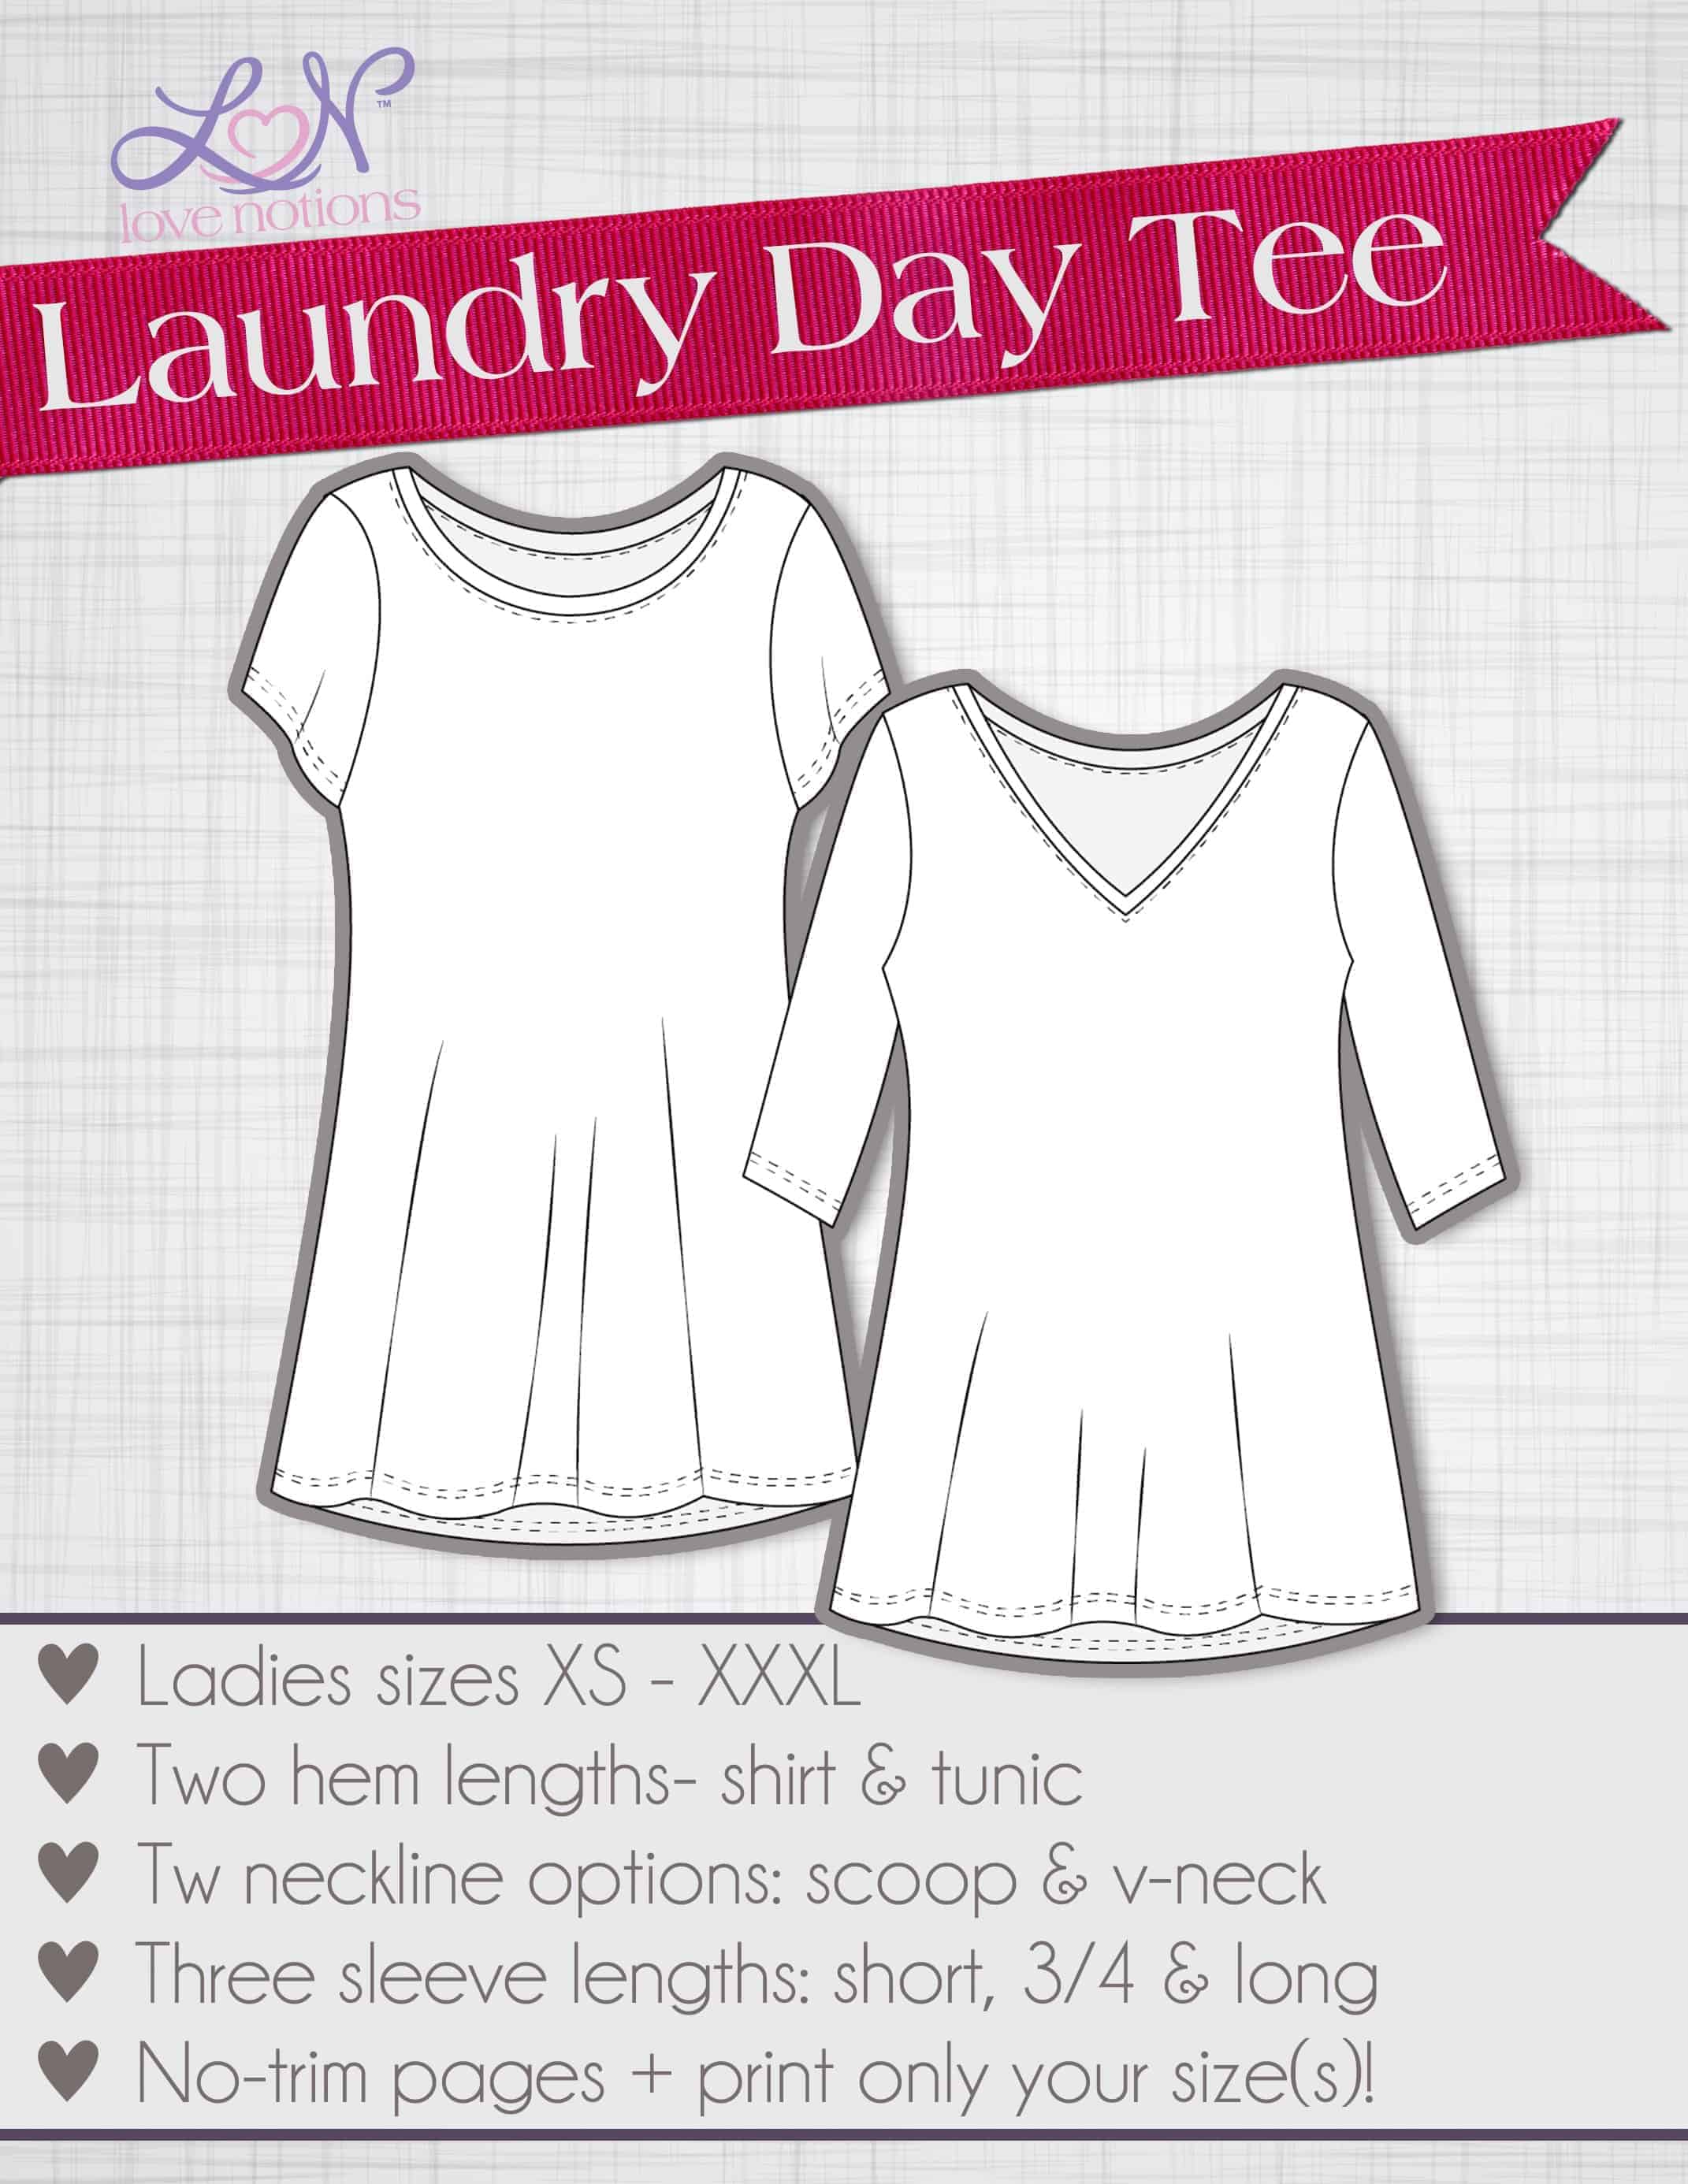 Laundry Day Tee XS-XXXL - Love Notions Sewing Patterns